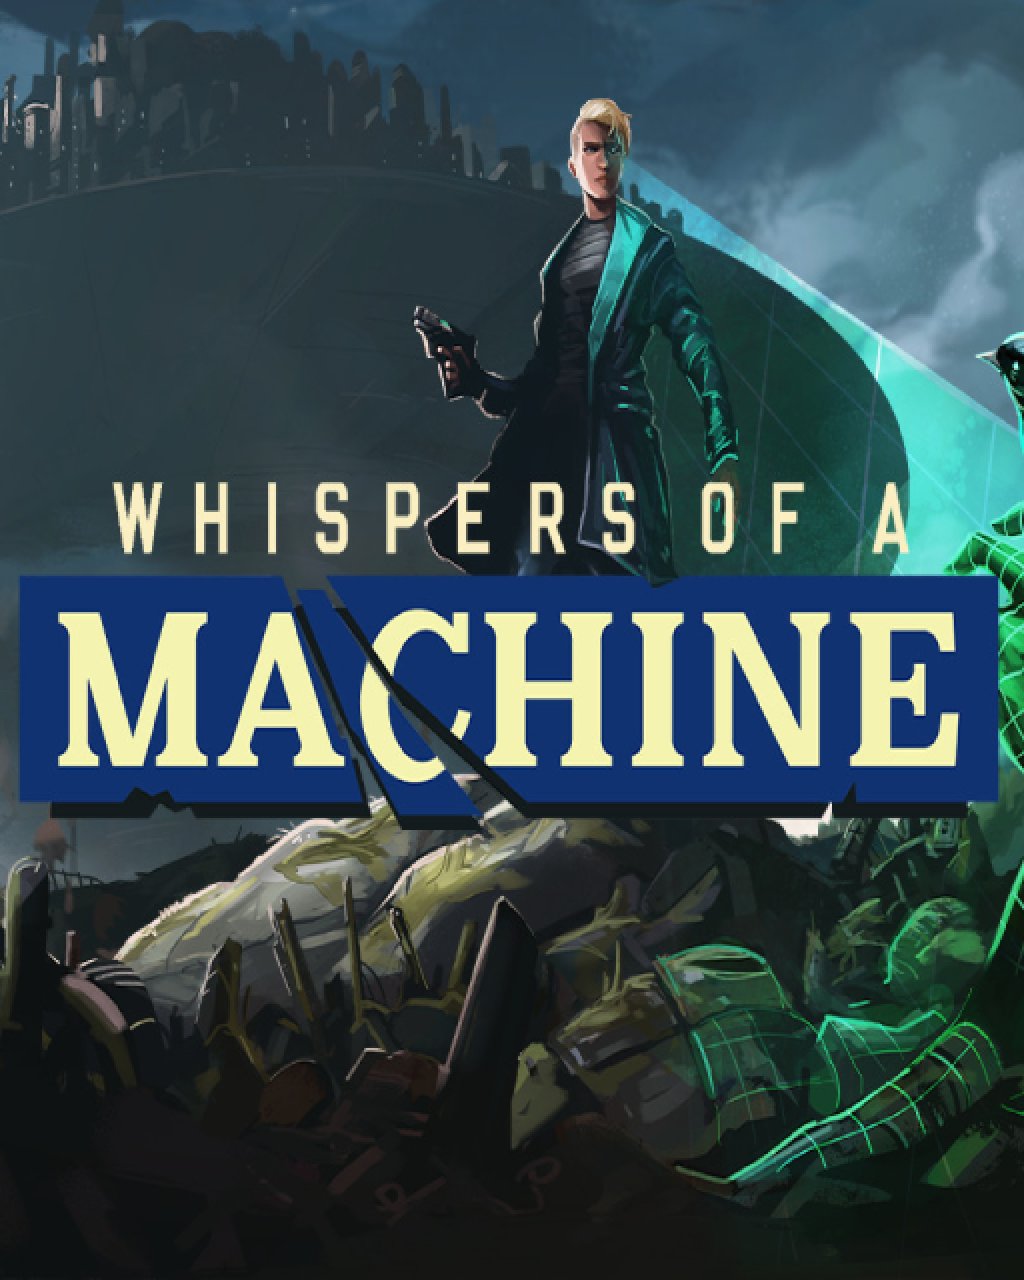 Whispers of a Machine